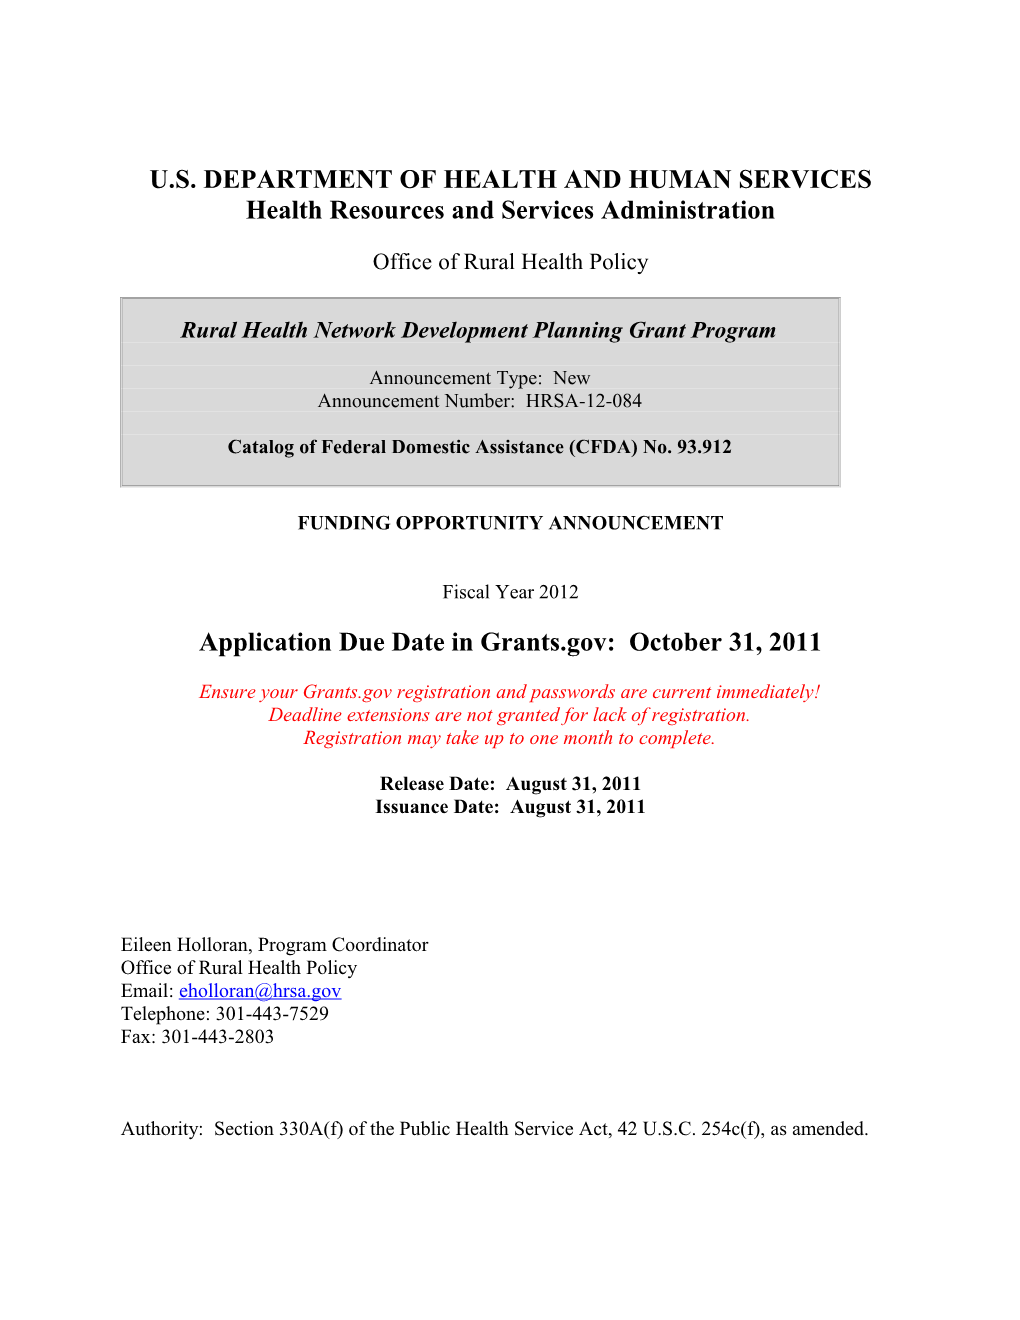 Funding Opportunity Announcement HRSA-12-084